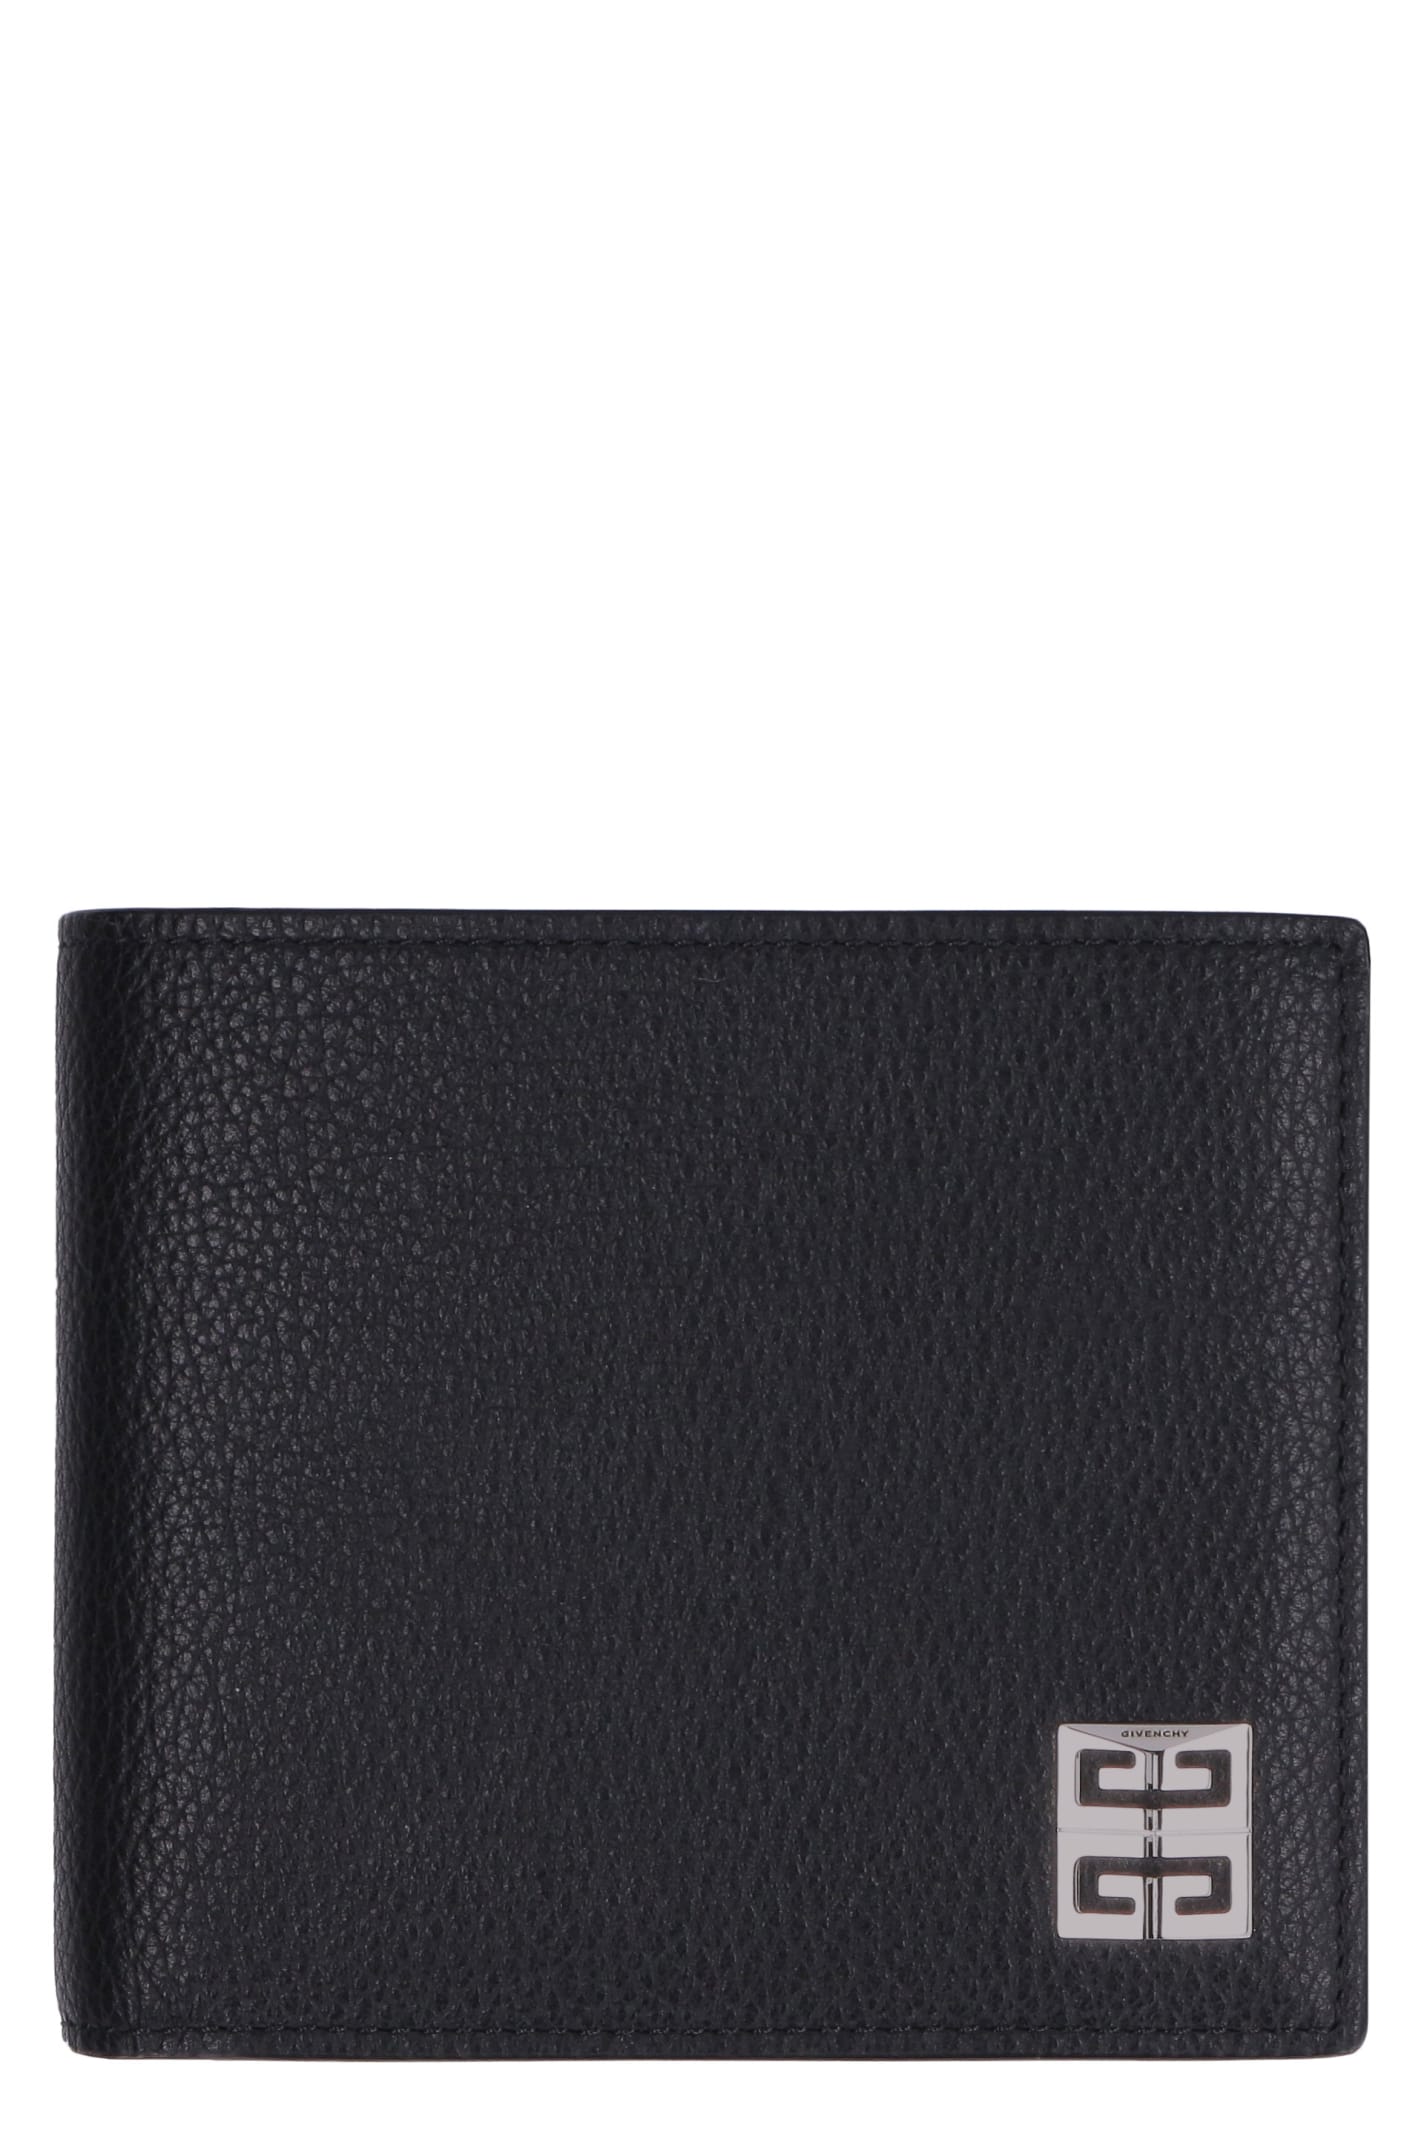 Givenchy Logo Leather Wallet